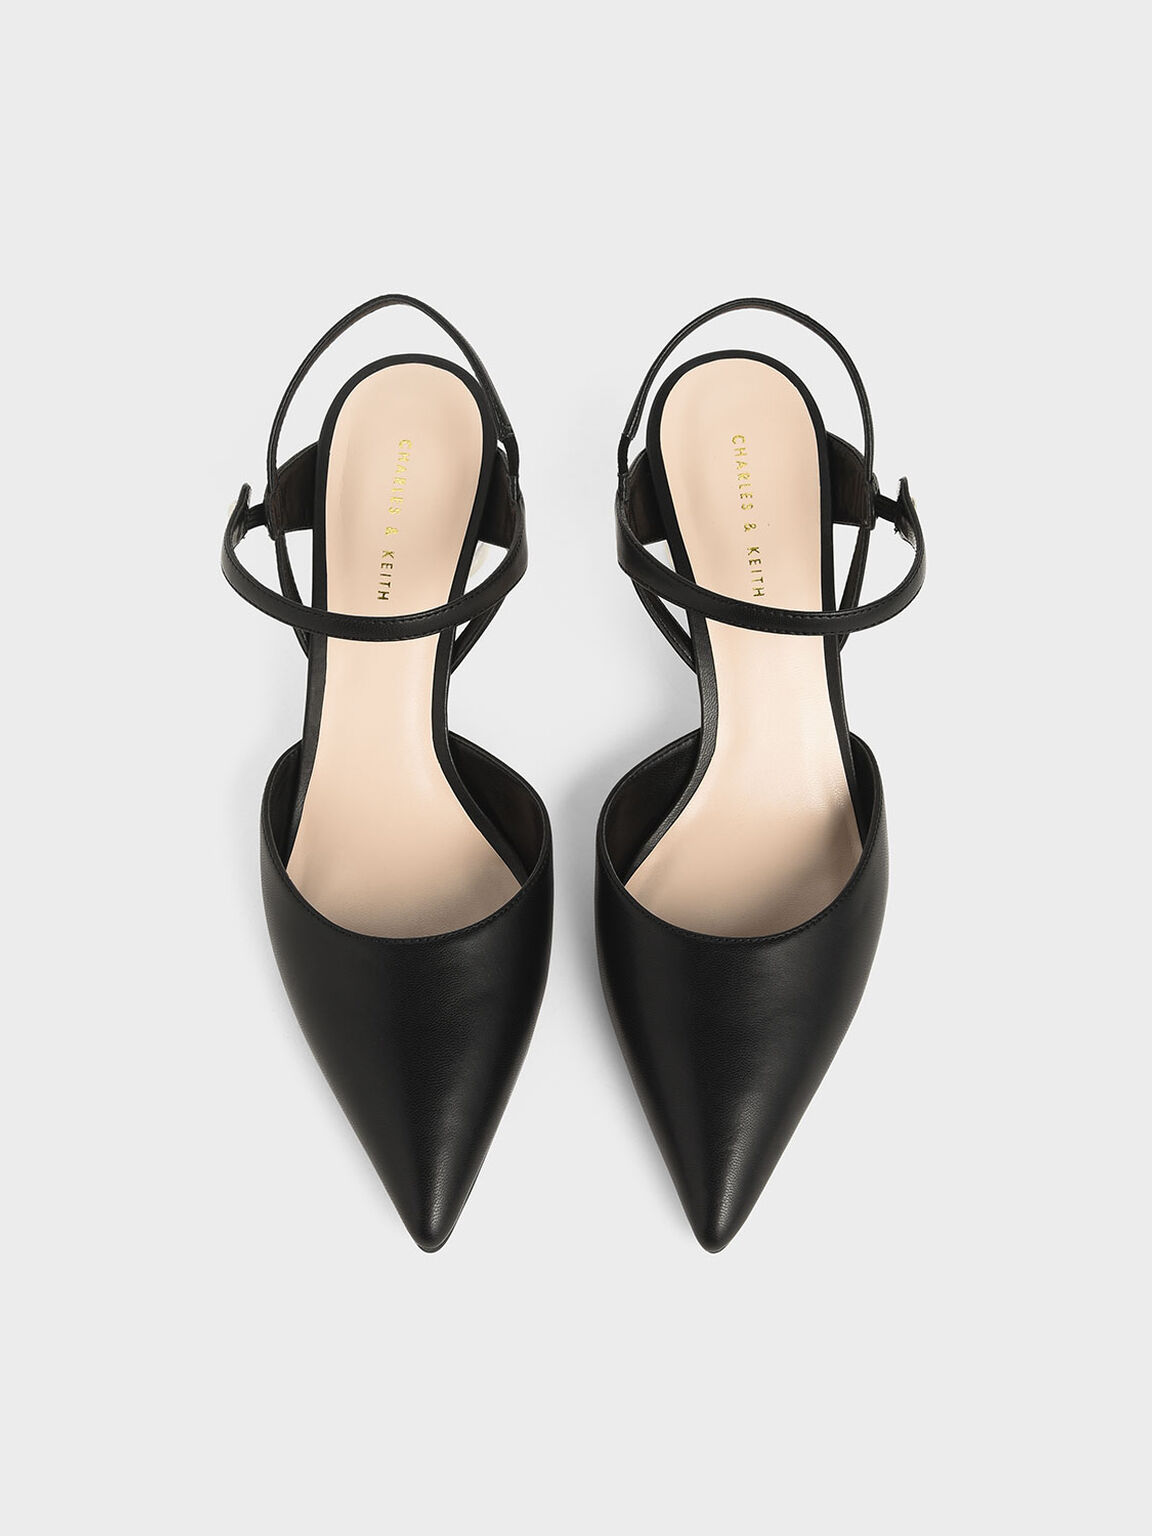 Pointed Toe Lucite Heel Cylindrical Pumps, Black, hi-res